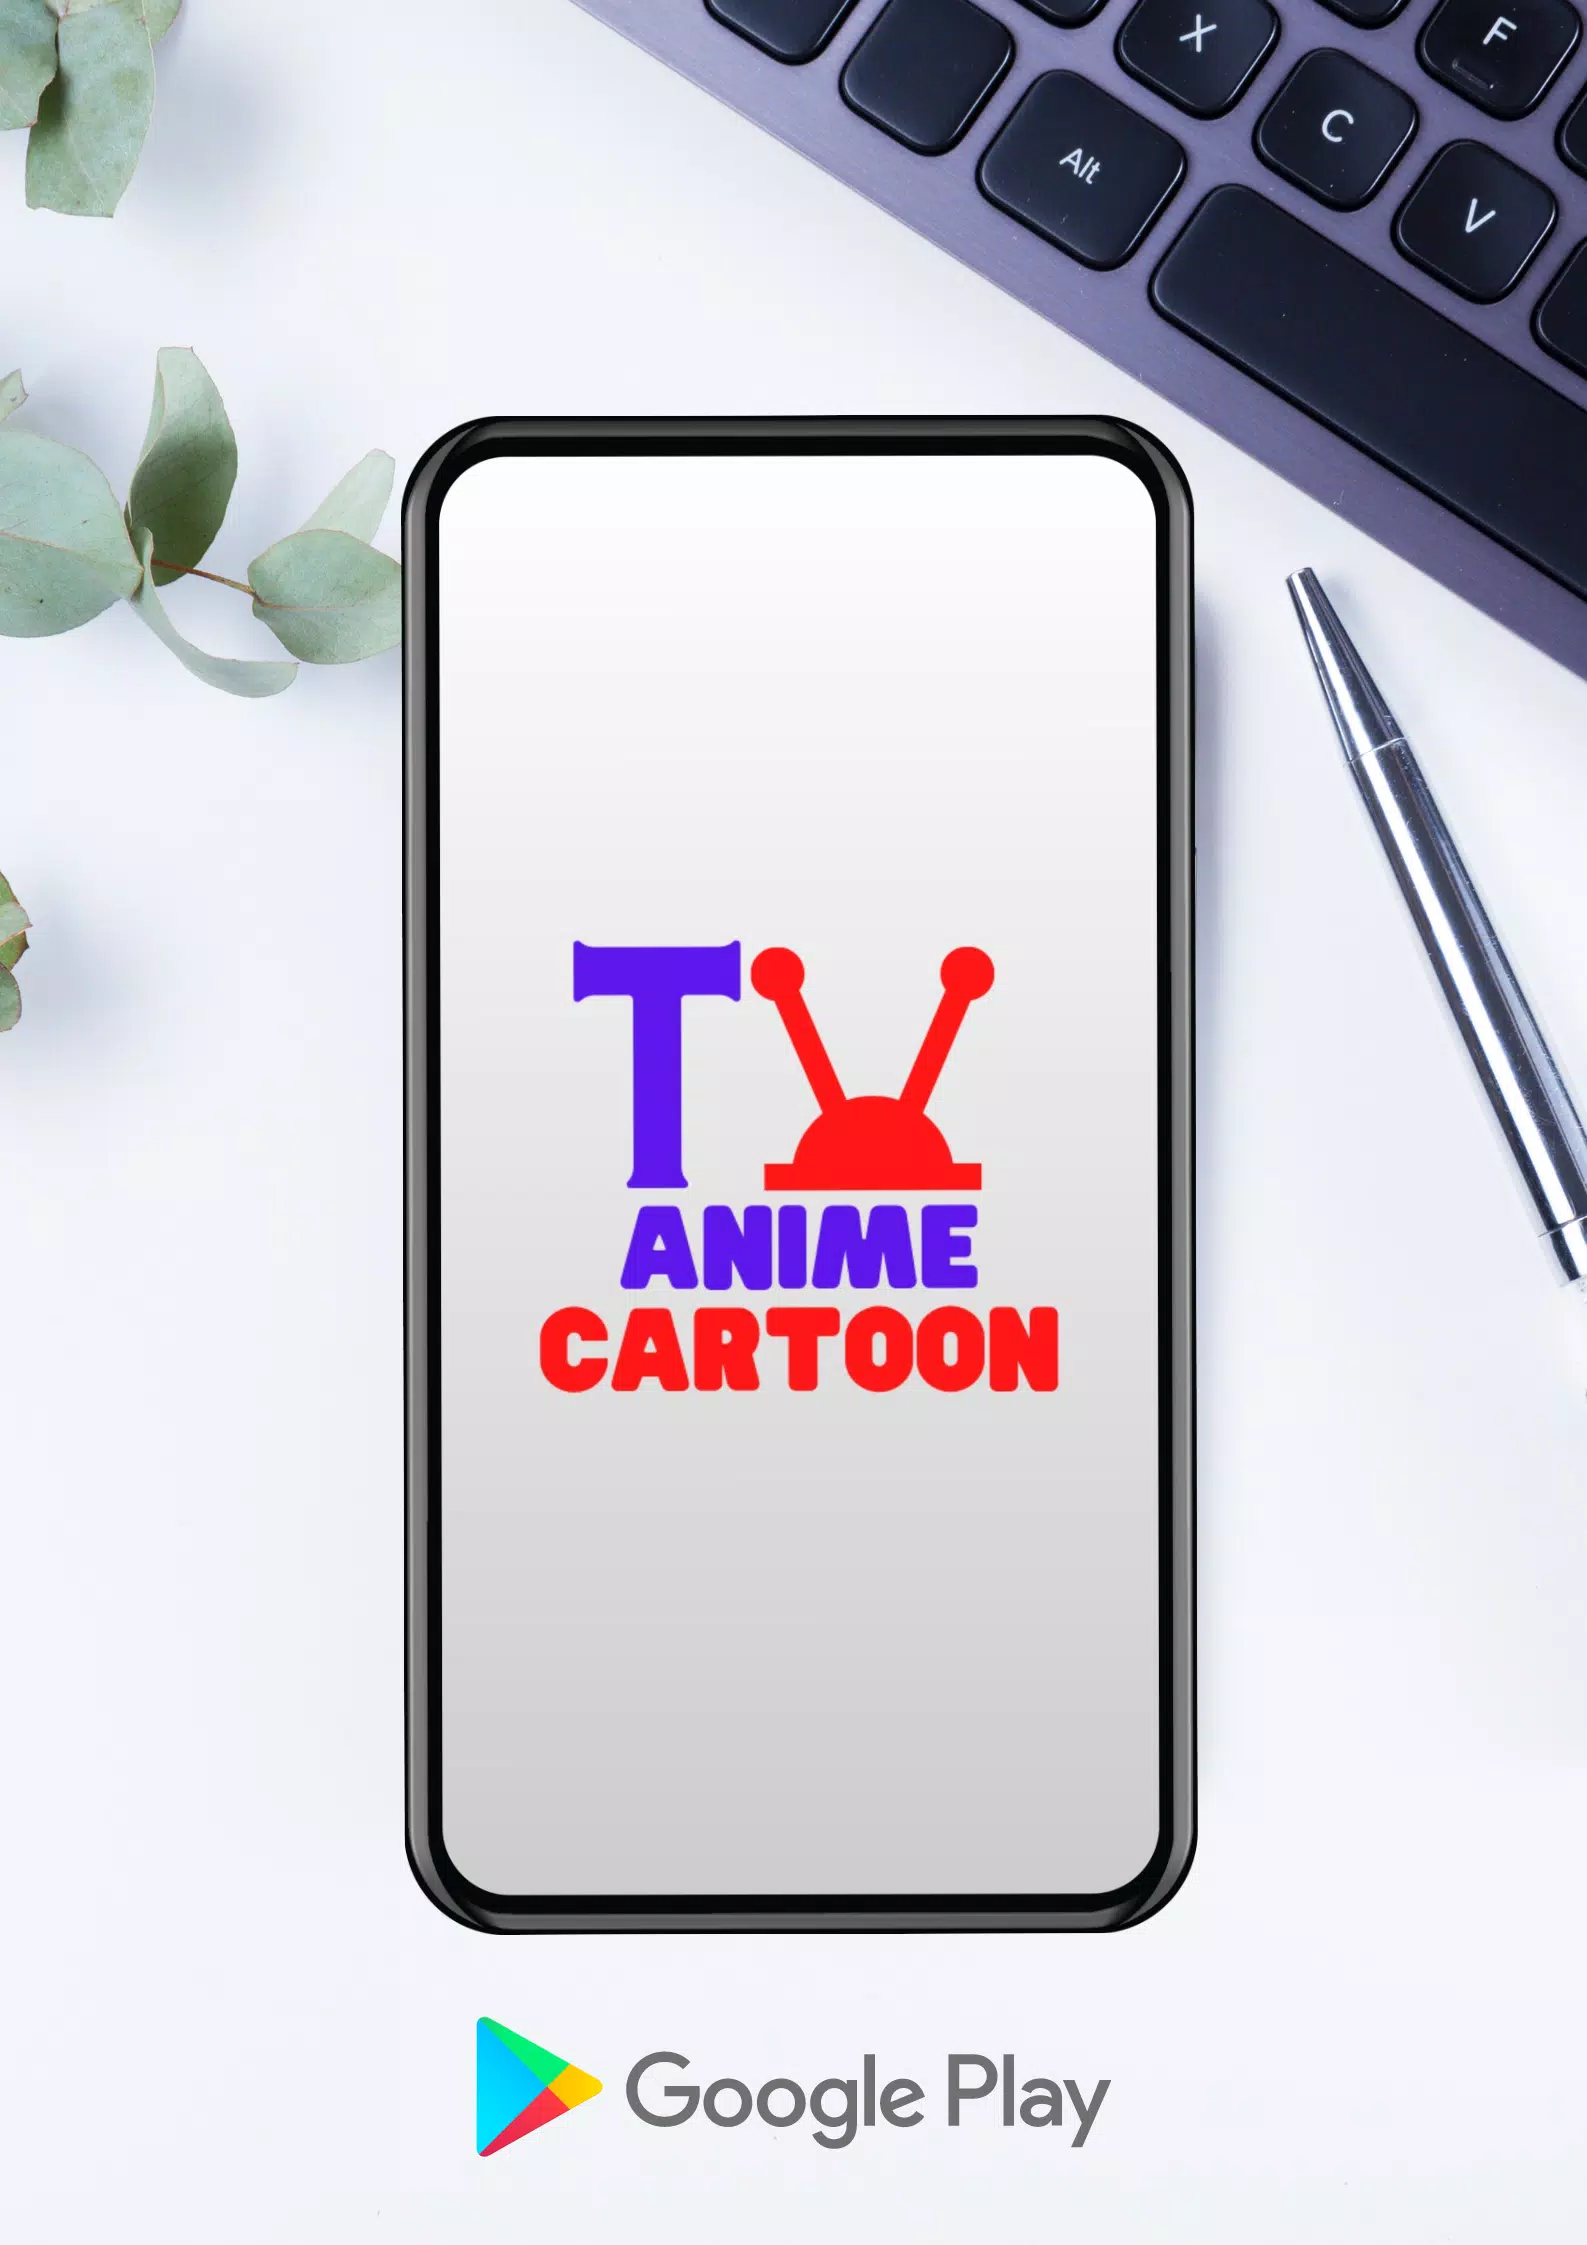 Animes Tv online - Apps on Google Play